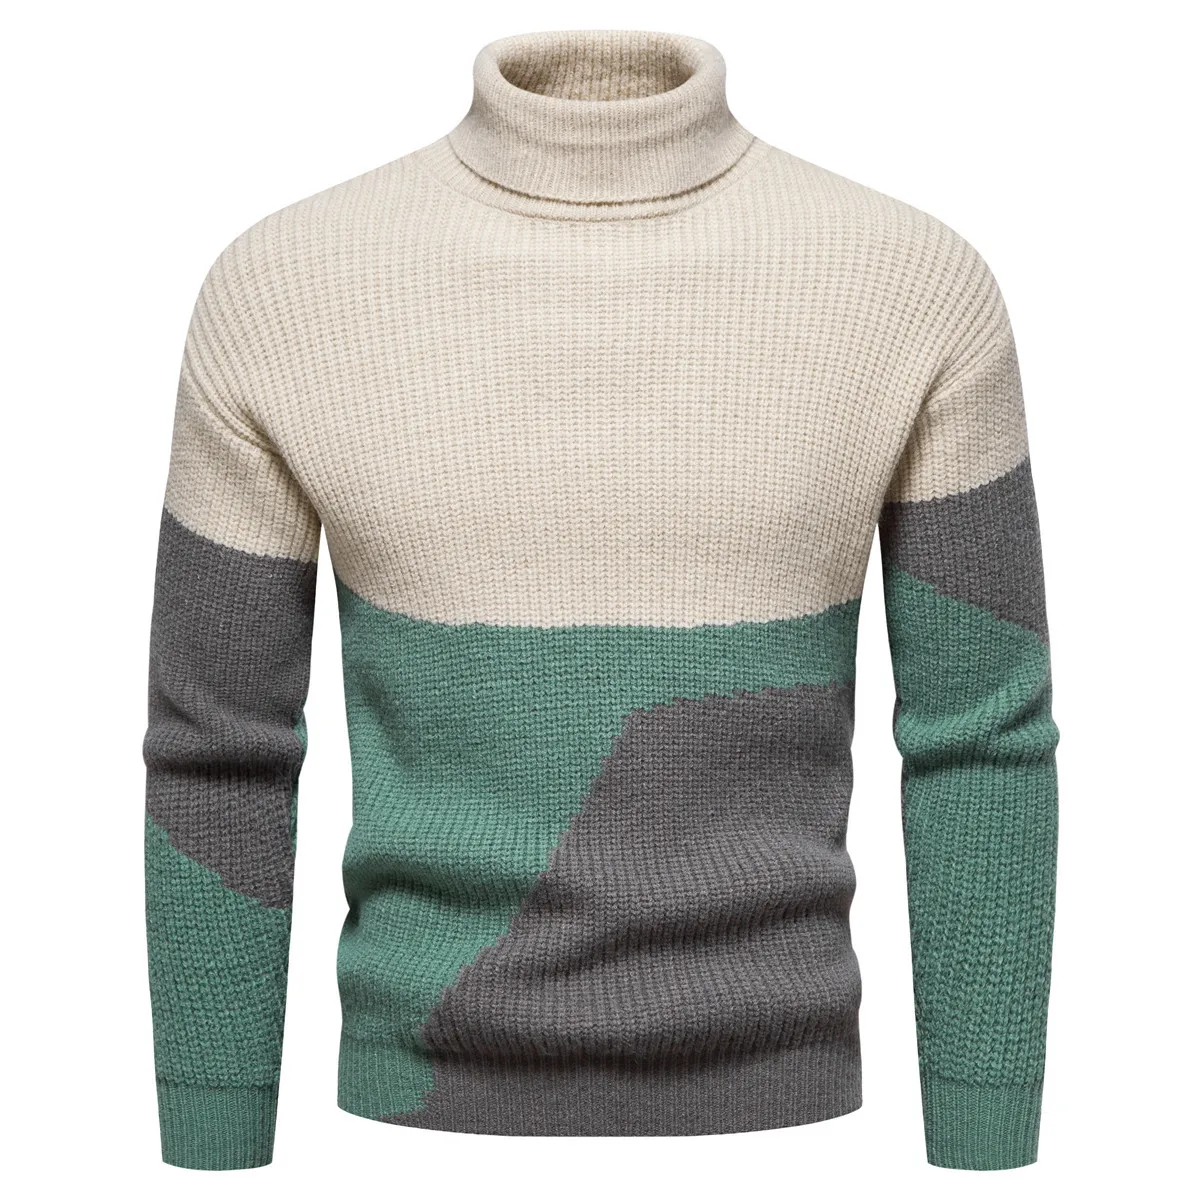 

Autumn and Winter New Men's Knitwear Colored High Neck Sweater Men's Underlay Slim Fit Pullover Sweater